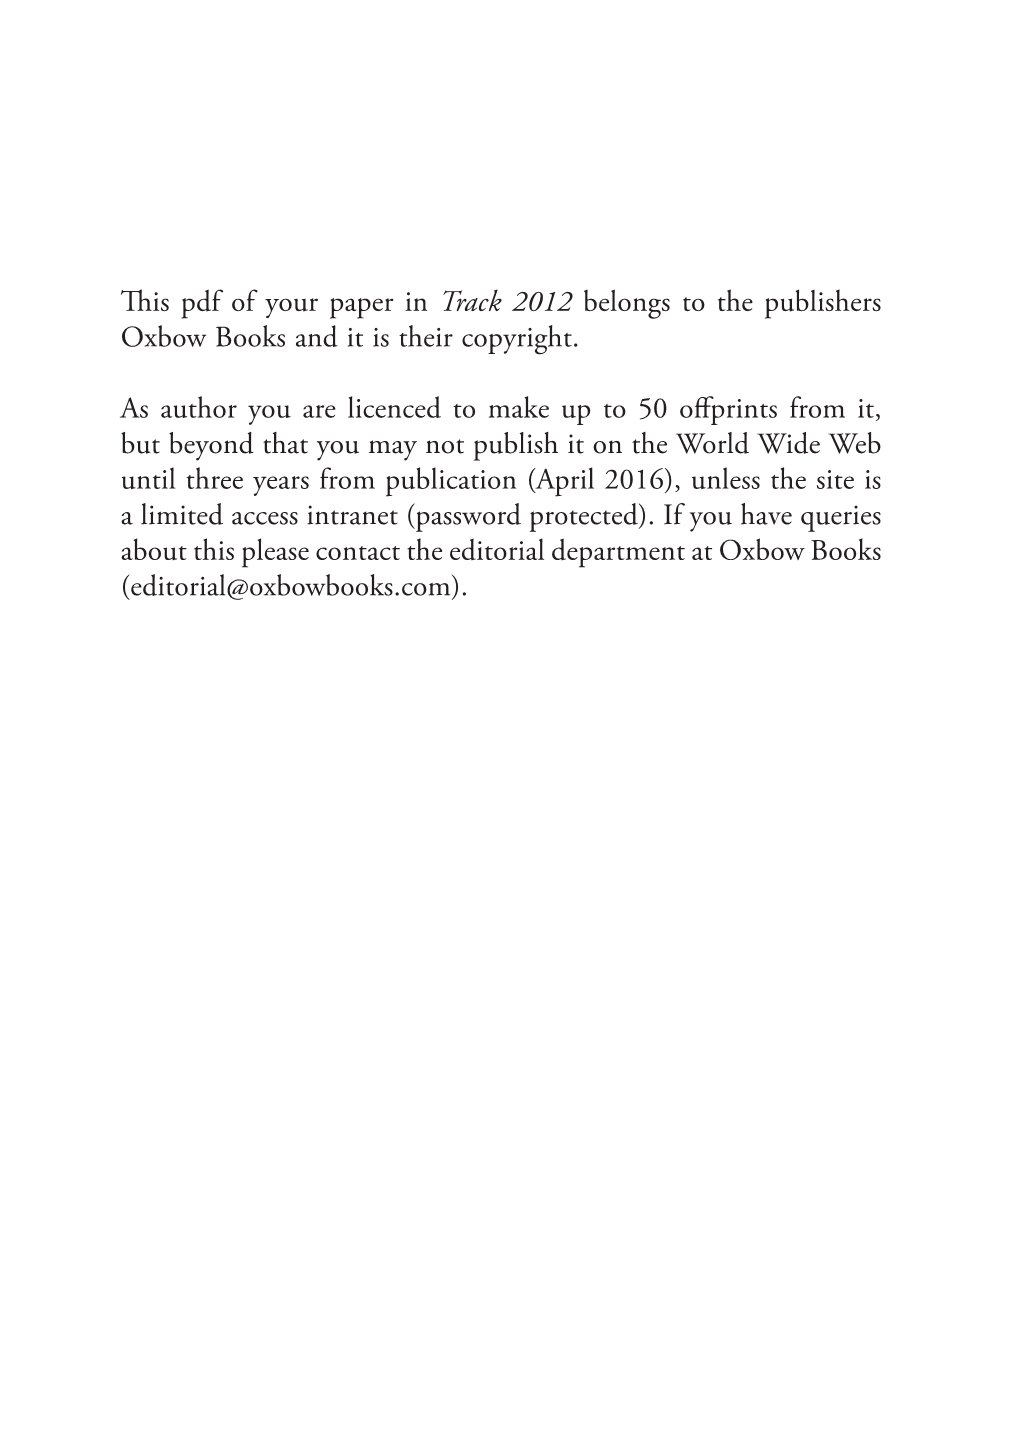 This Pdf of Your Paper in Track 2012 Belongs to the Publishers Oxbow Books and It Is Their Copyright